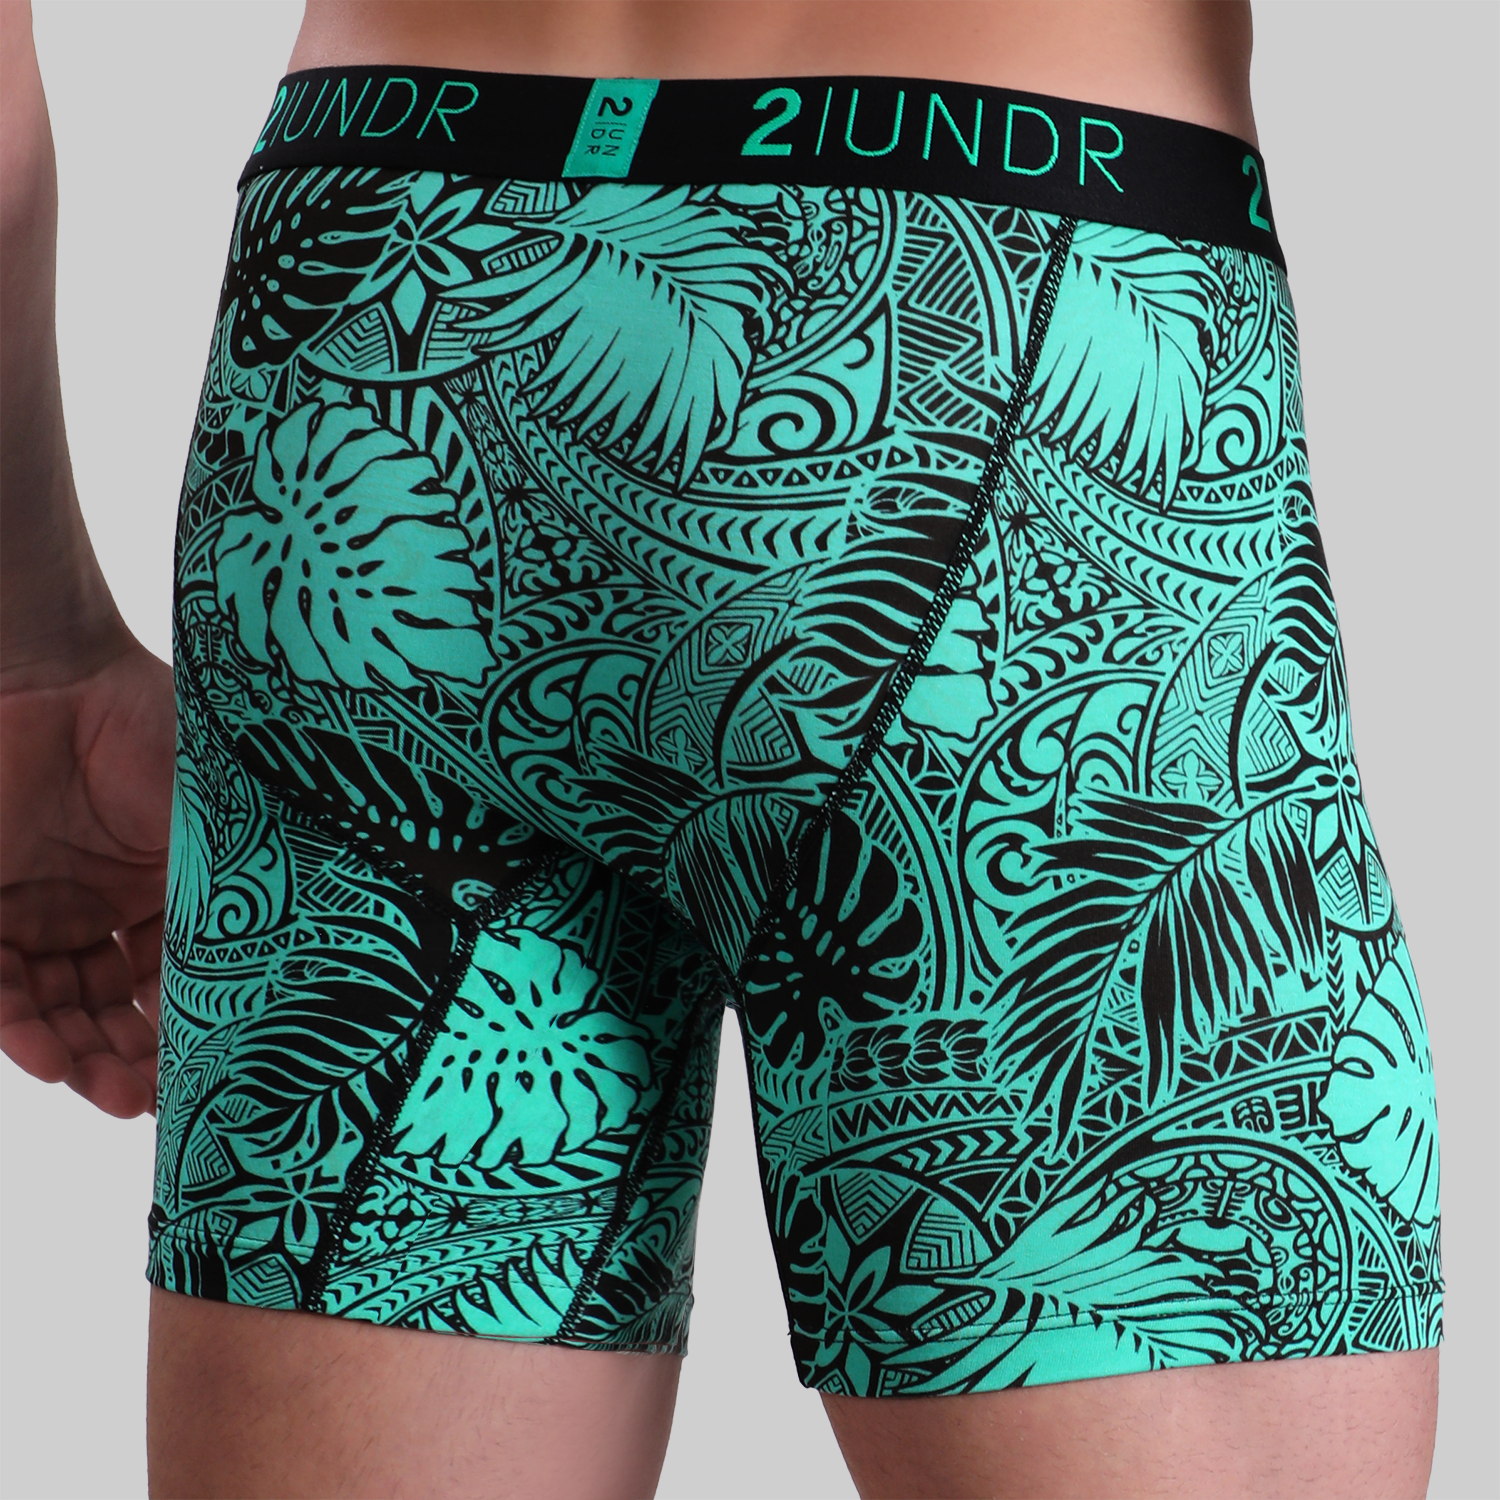 2UNDR - Printed Swing Shift Boxers Samoa - all things being eco chilliwack - men's clothing store - sustainable fashion